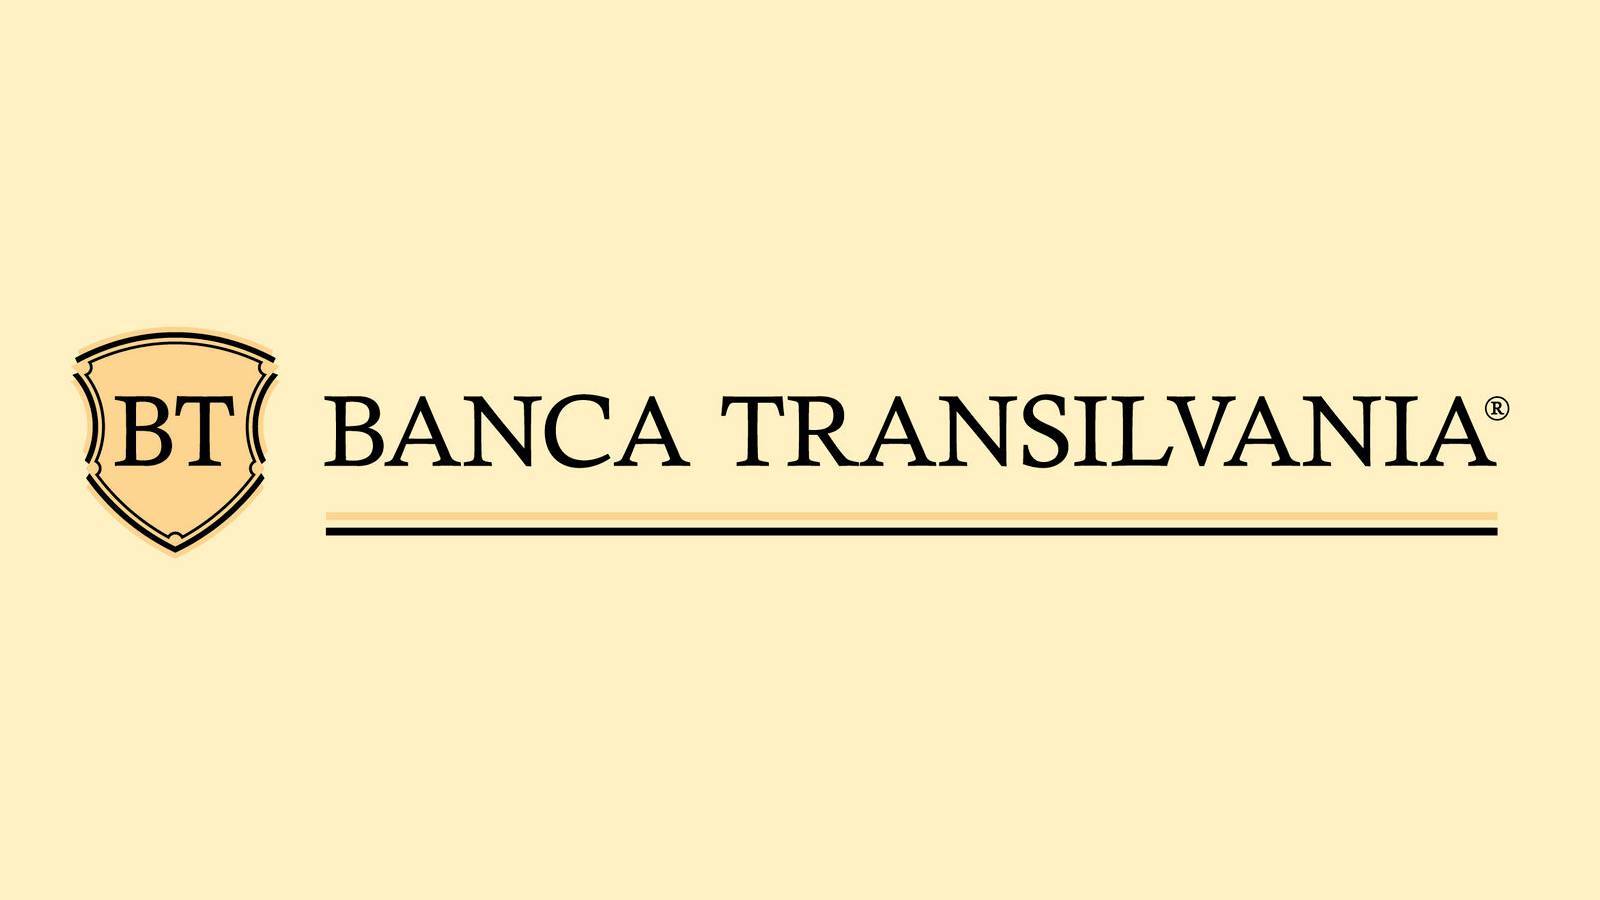 BANCA Transilvania Two Official Changes IMPORTANT LAST MINUTE Measures Romania